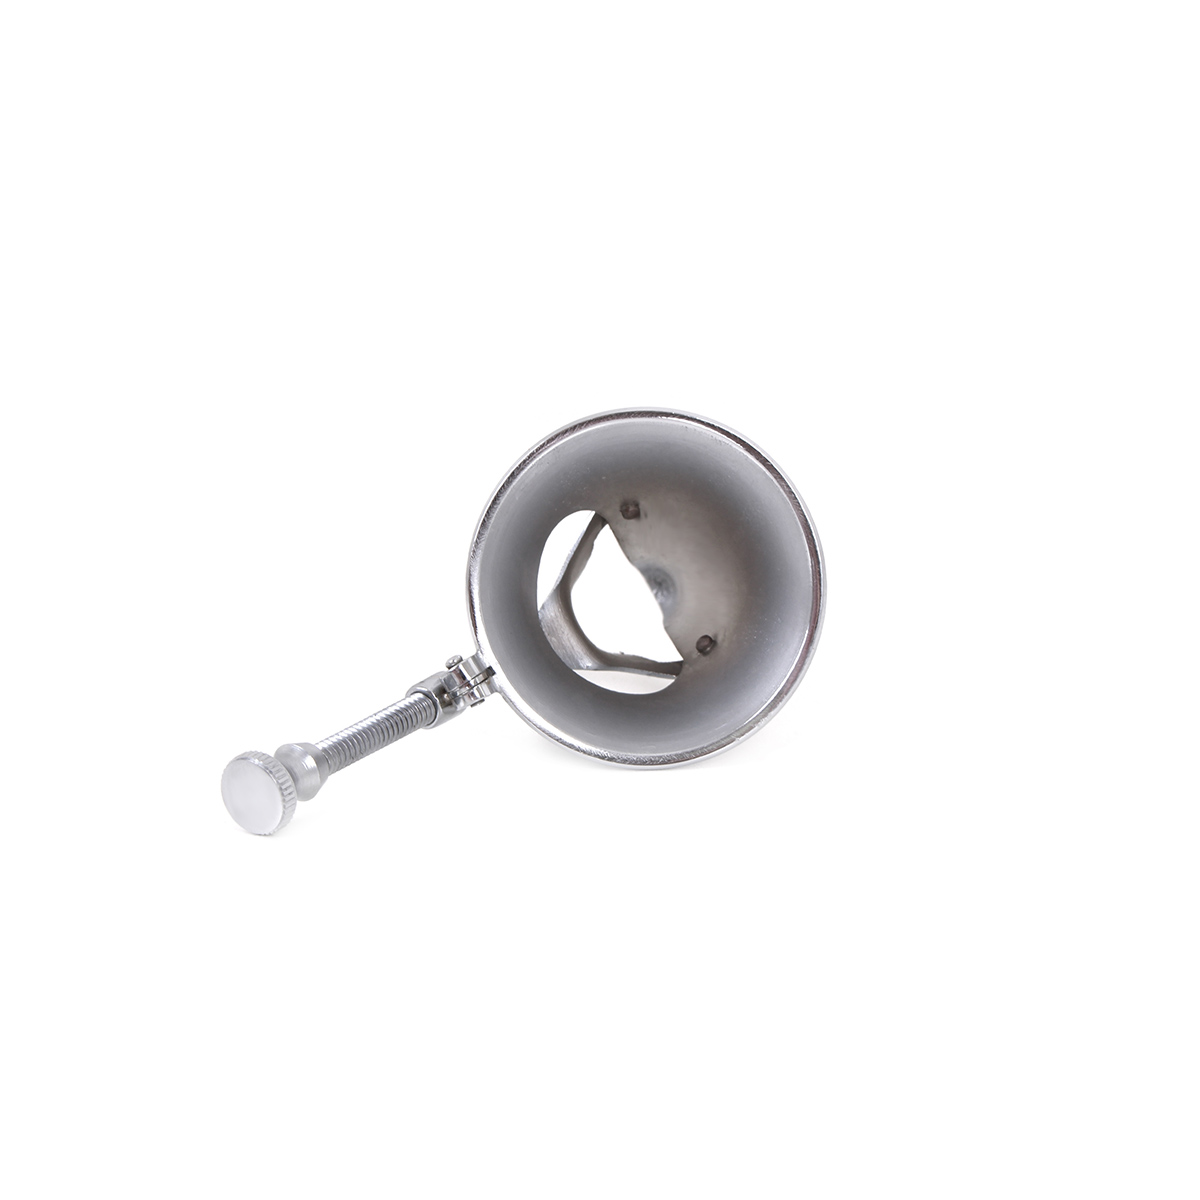 Collin-Small-Anal-Speculum-OPR-2960090-3